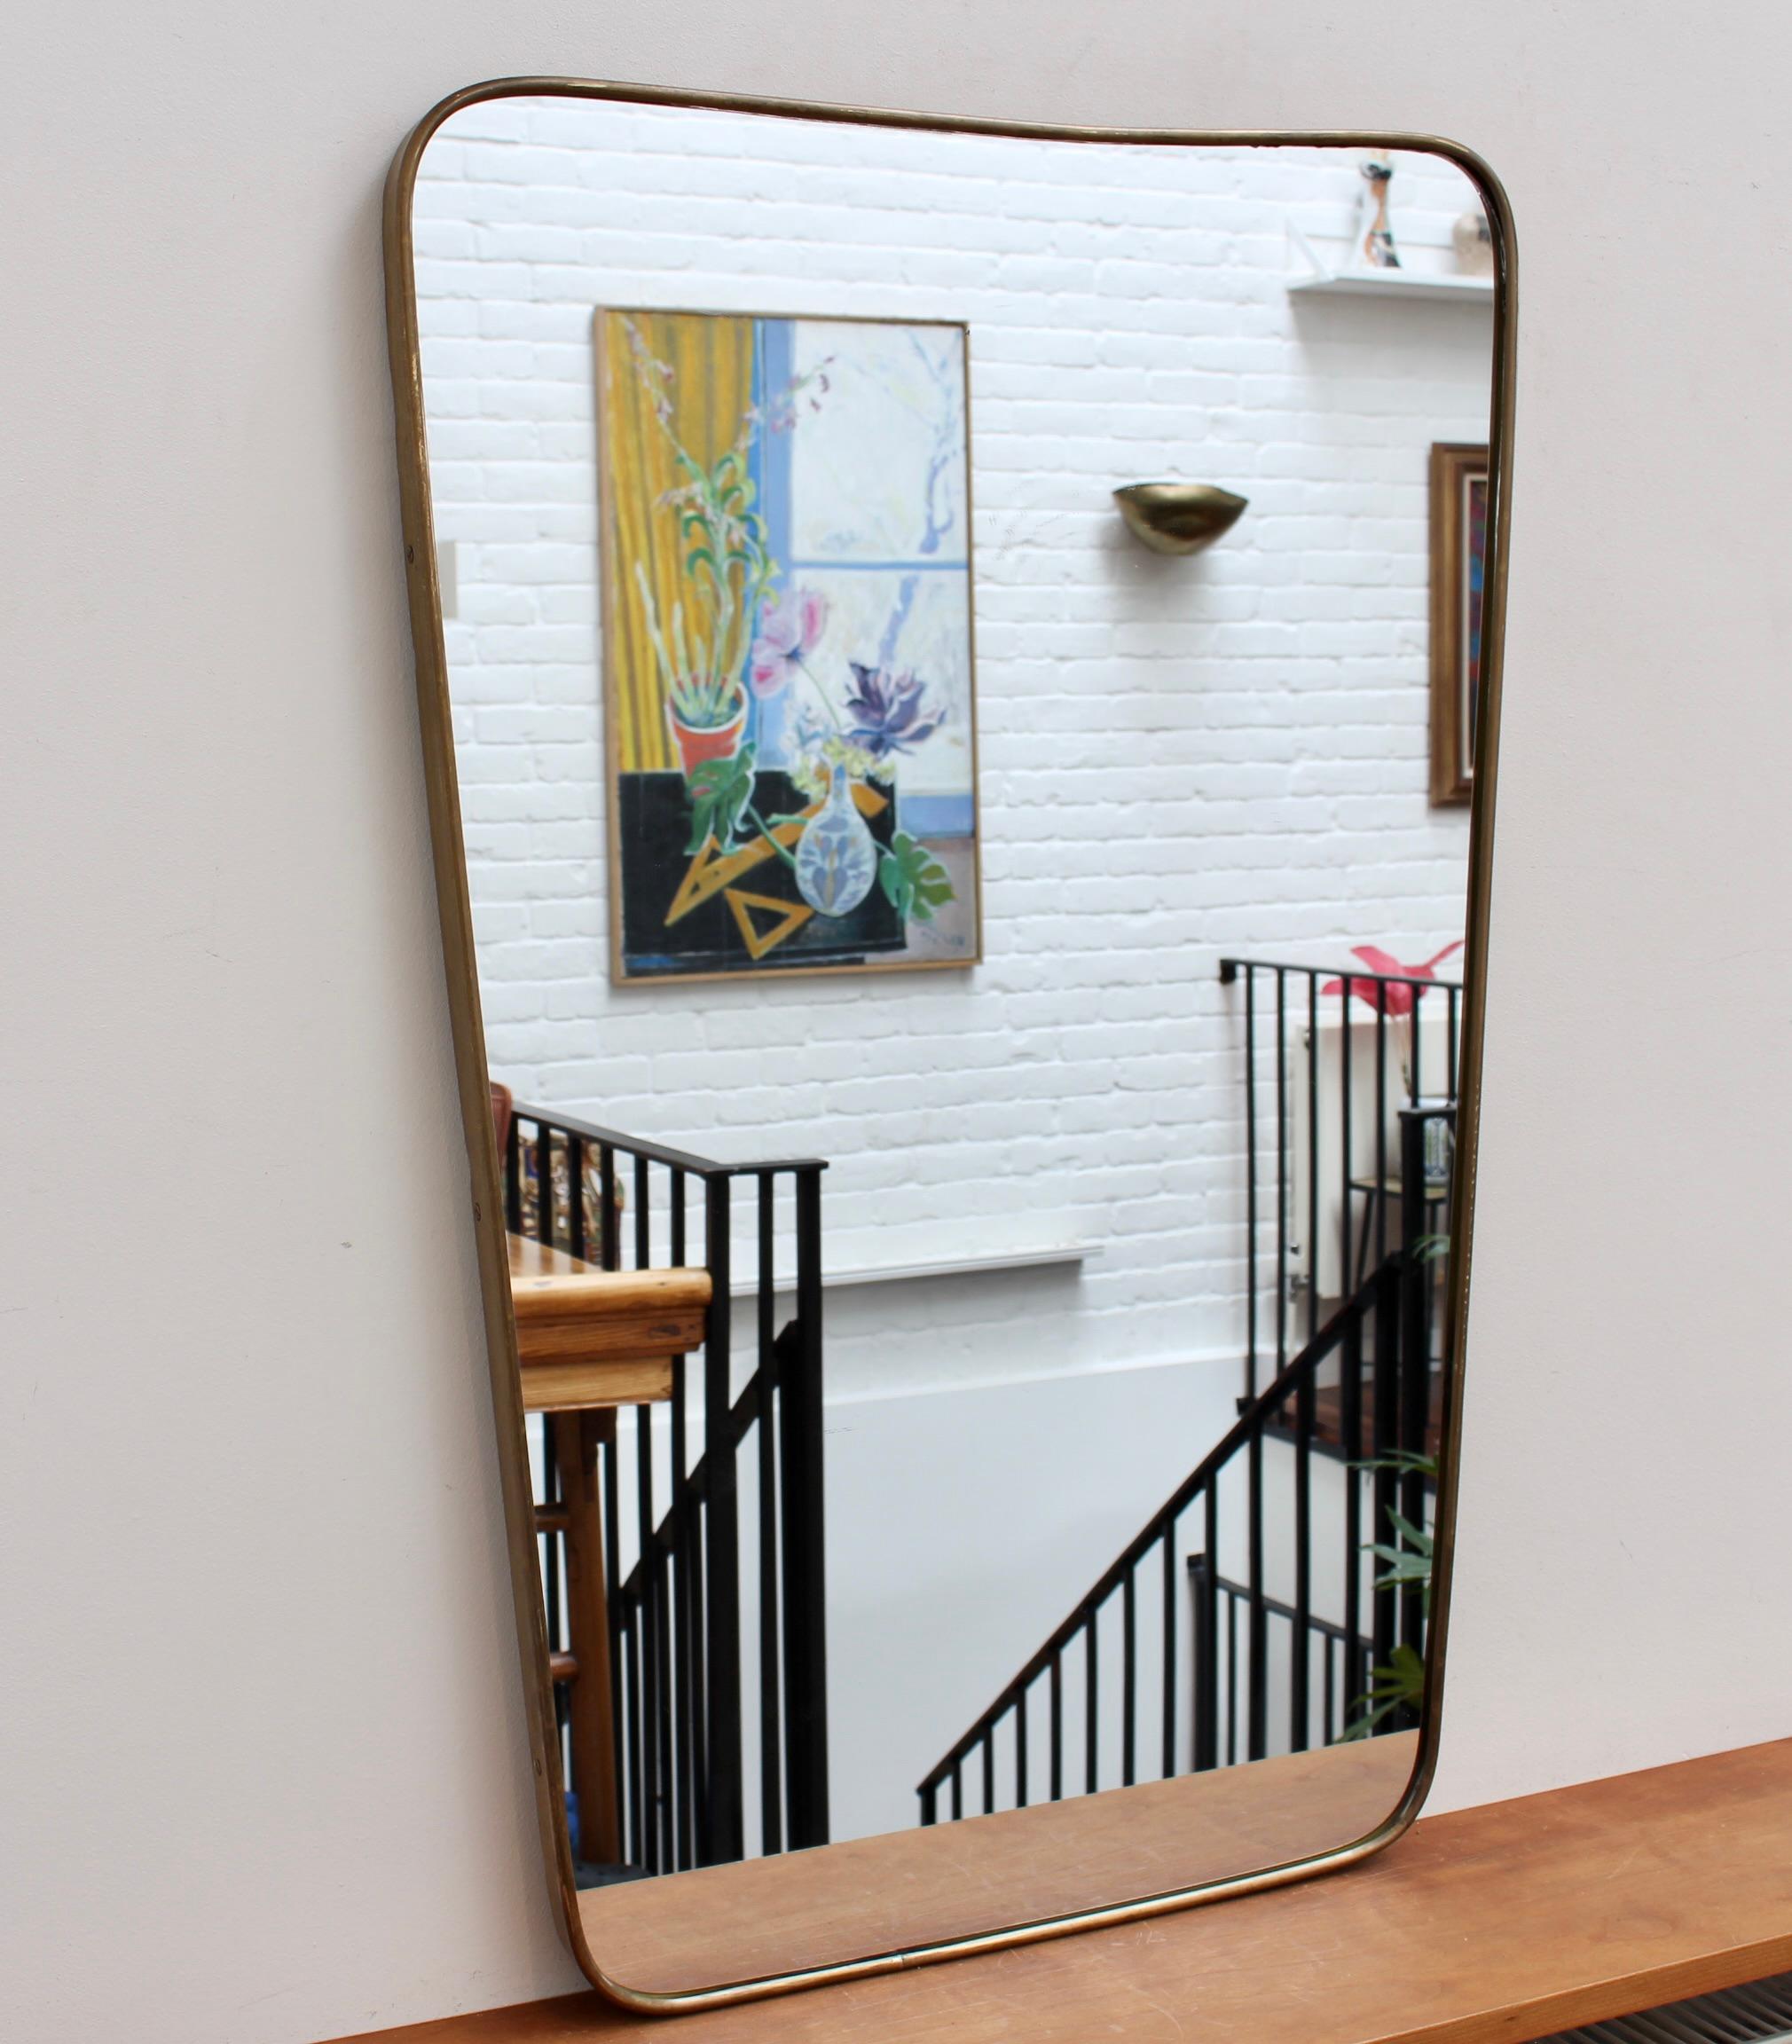 Vintage Italian Wall Mirror with Brass Frame (circa 1960s). The mirror is beautifully shaped and classically elegant in a modern Gio Ponti style. The piece is in overall good condition with an aged patina on the brass frame. There is some slight